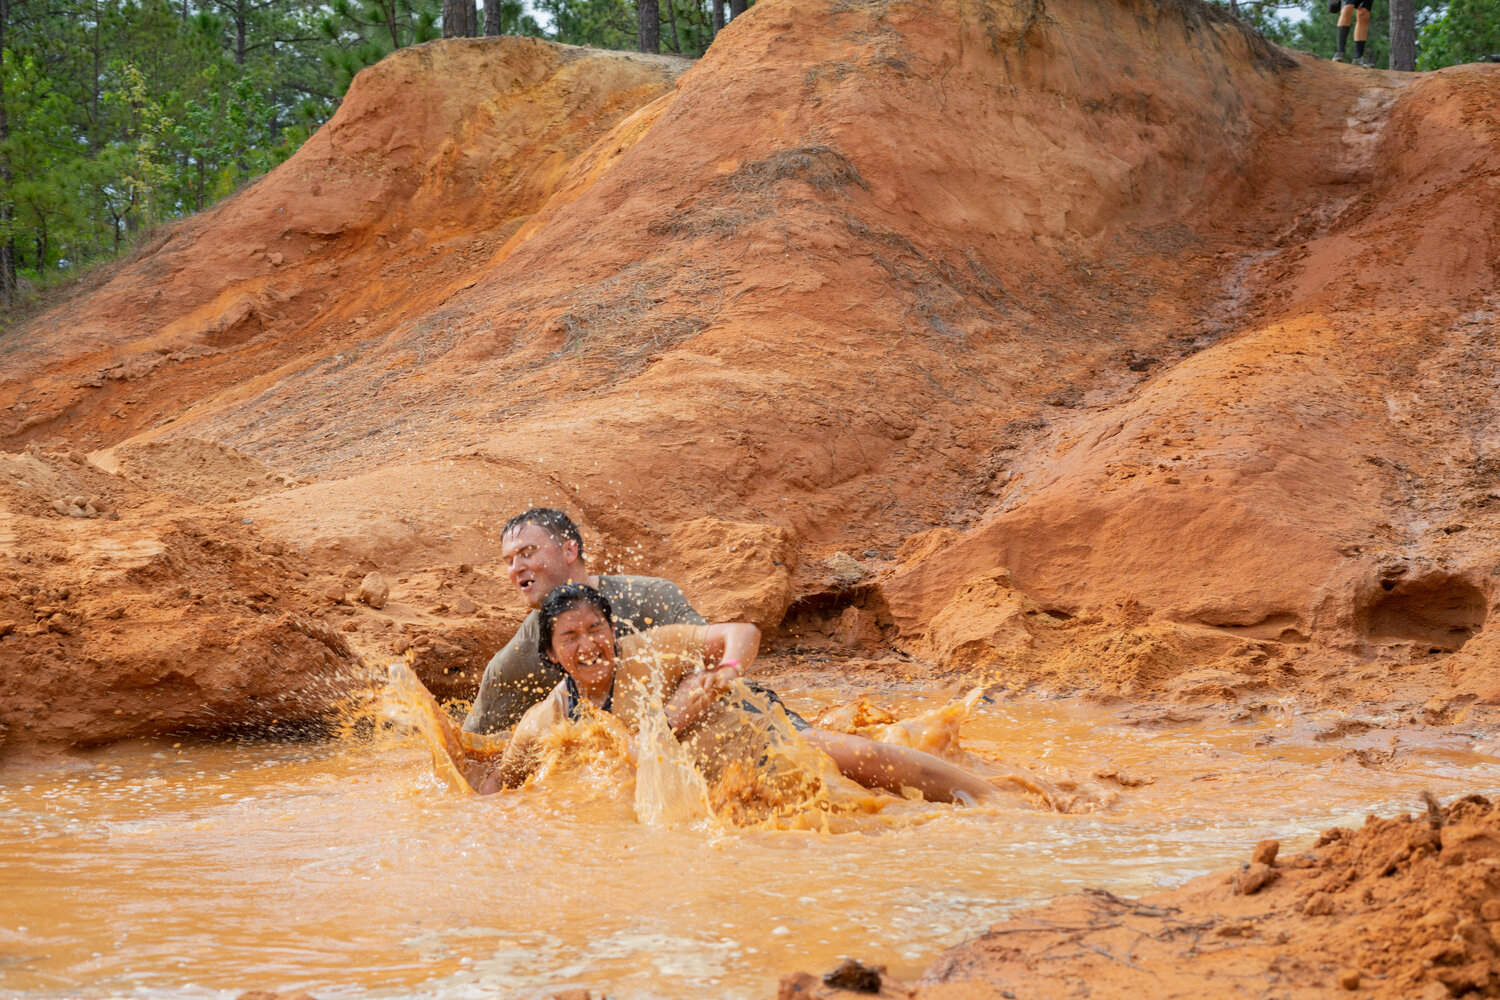 Cole Shumway and Nathaly Shumway participate in Fort Bragg's Mud Run on April 22 at McKellar's Lodge.